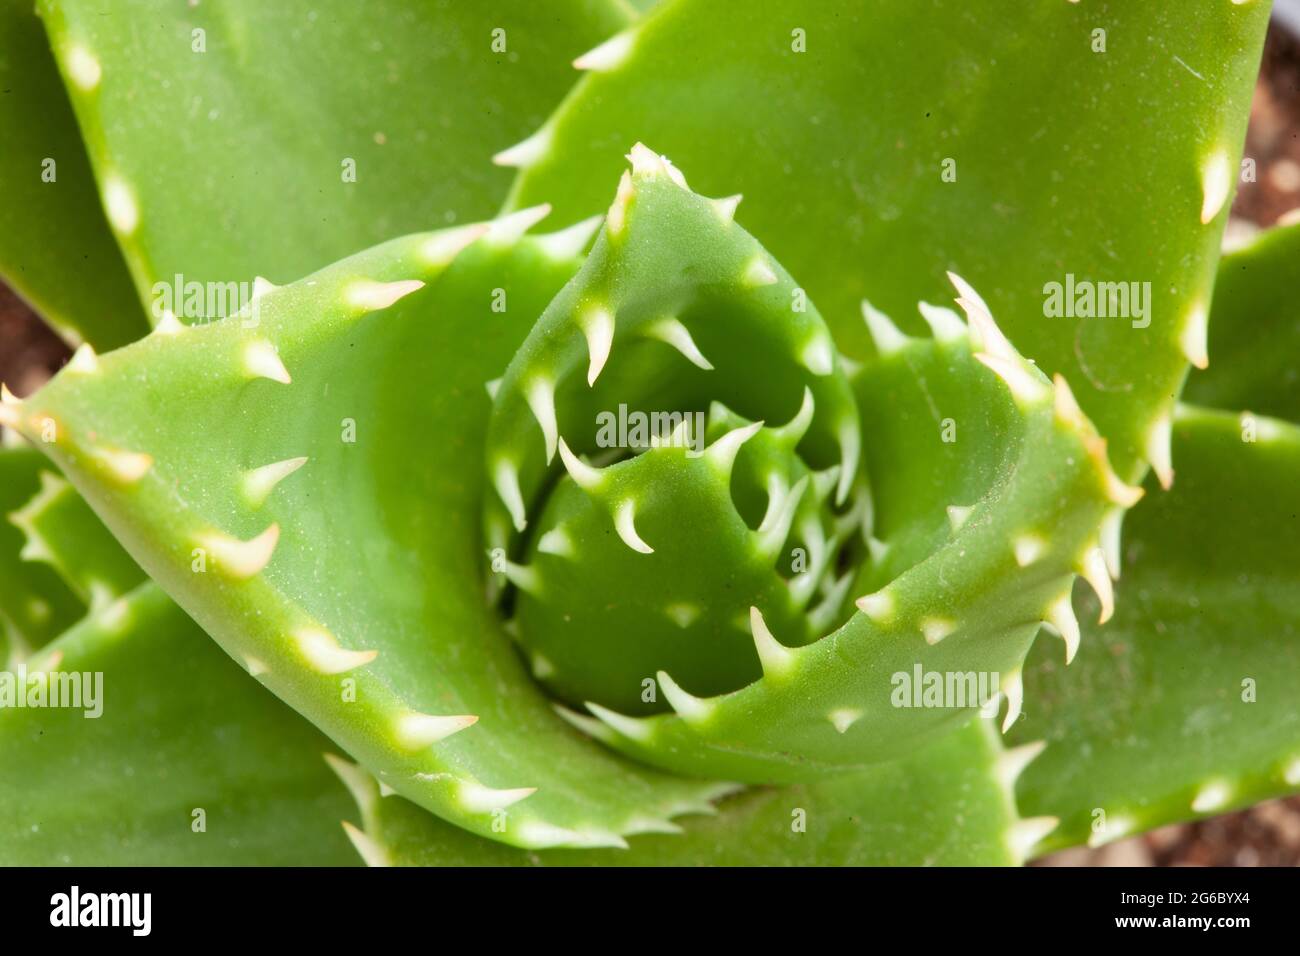 Ornamental green succulent with thick prickly leaves. Close-up of Aloe Ferox plant Stock Photo